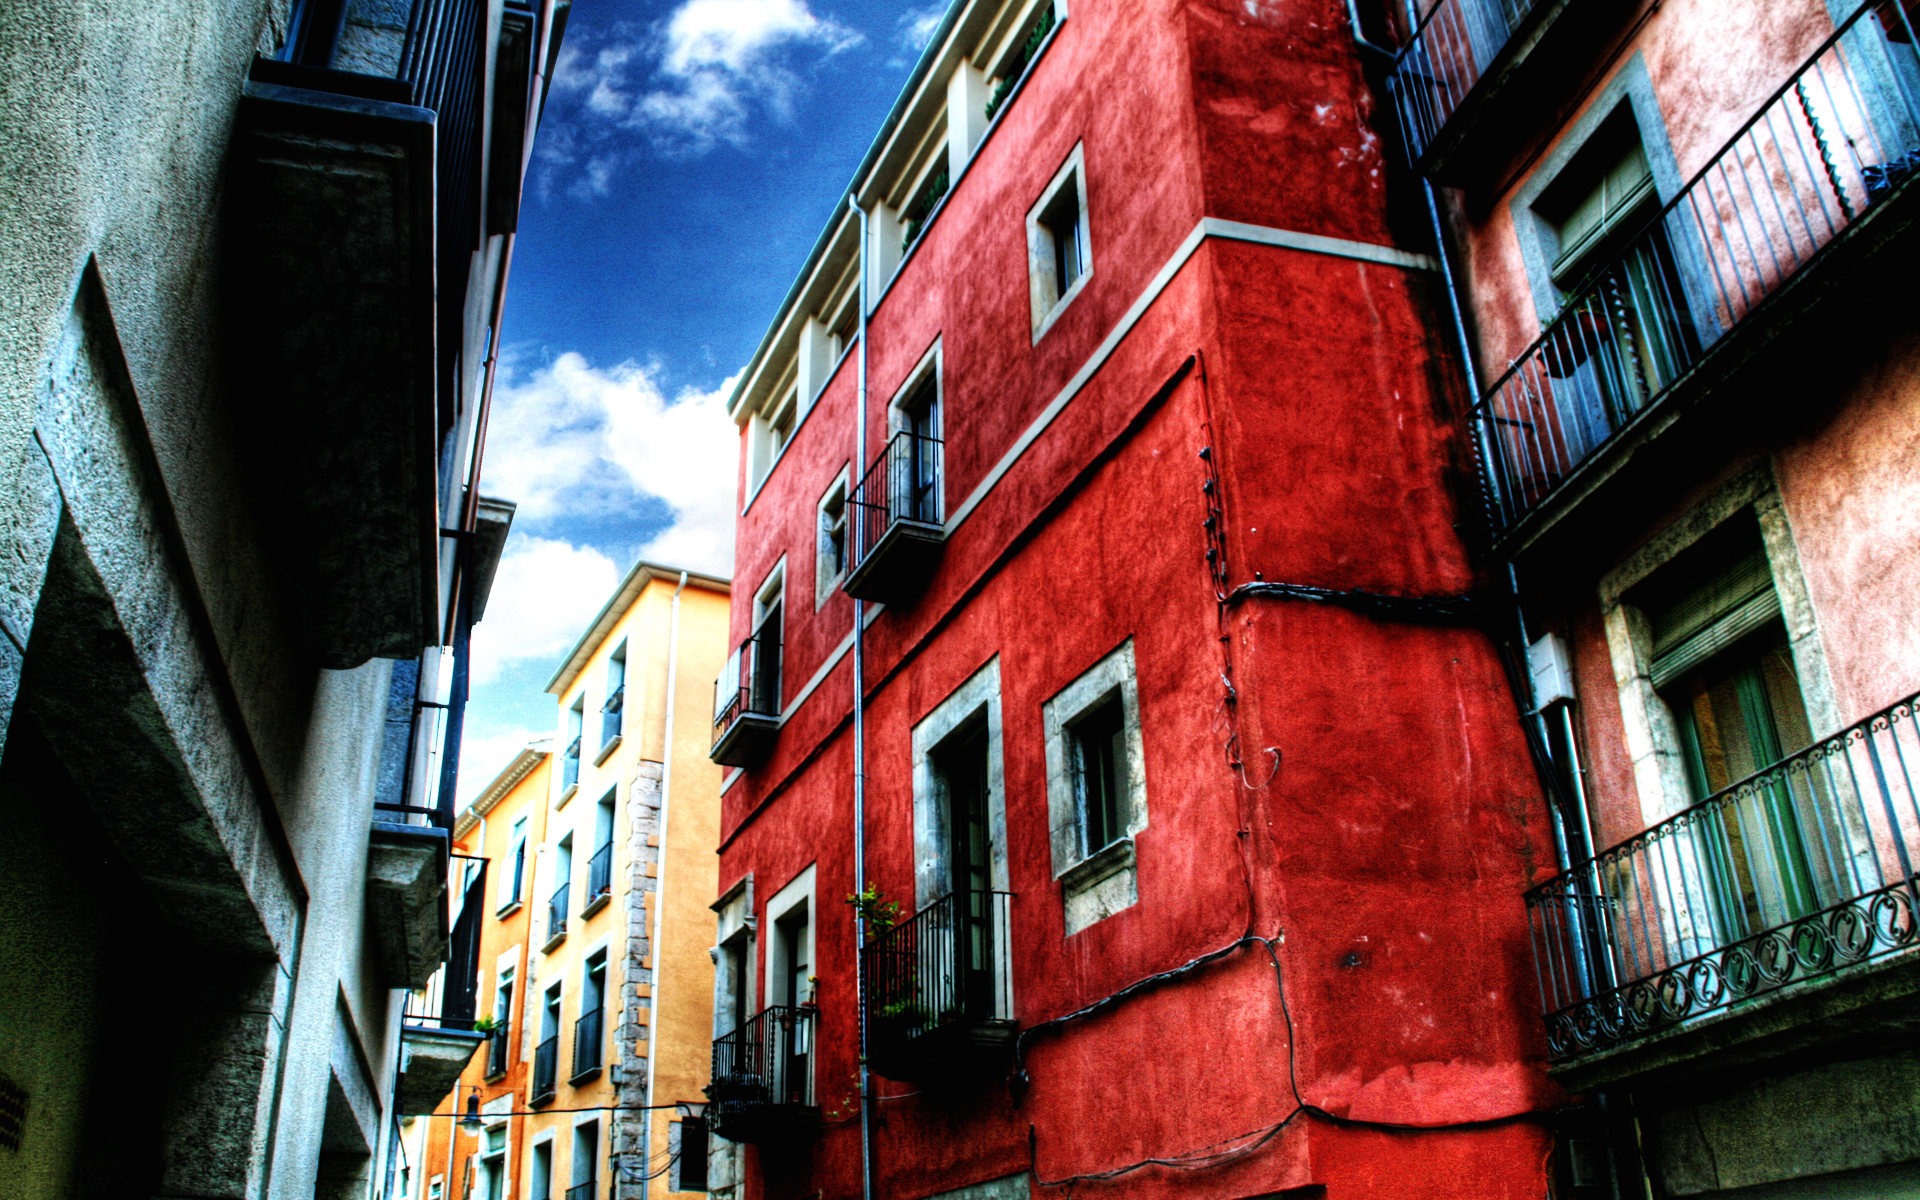 Spain Girona HDR-style wallpapers #4 - 1920x1200